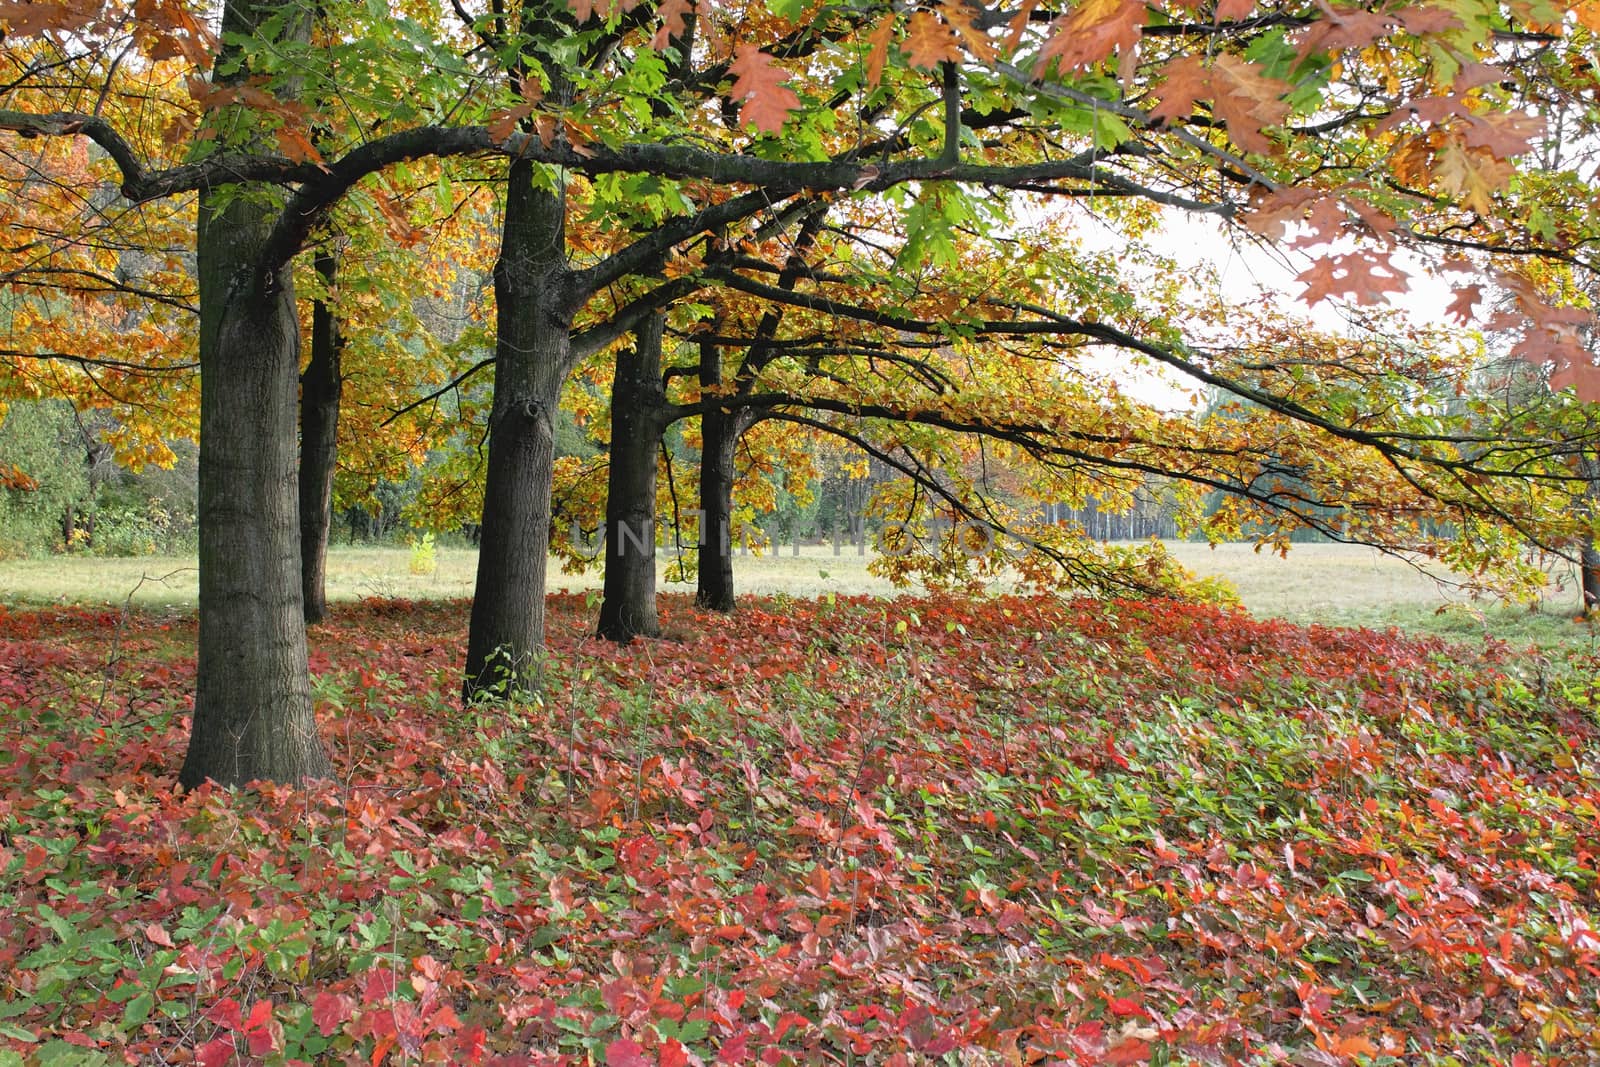 A number of old oak trees with red autumn leaves